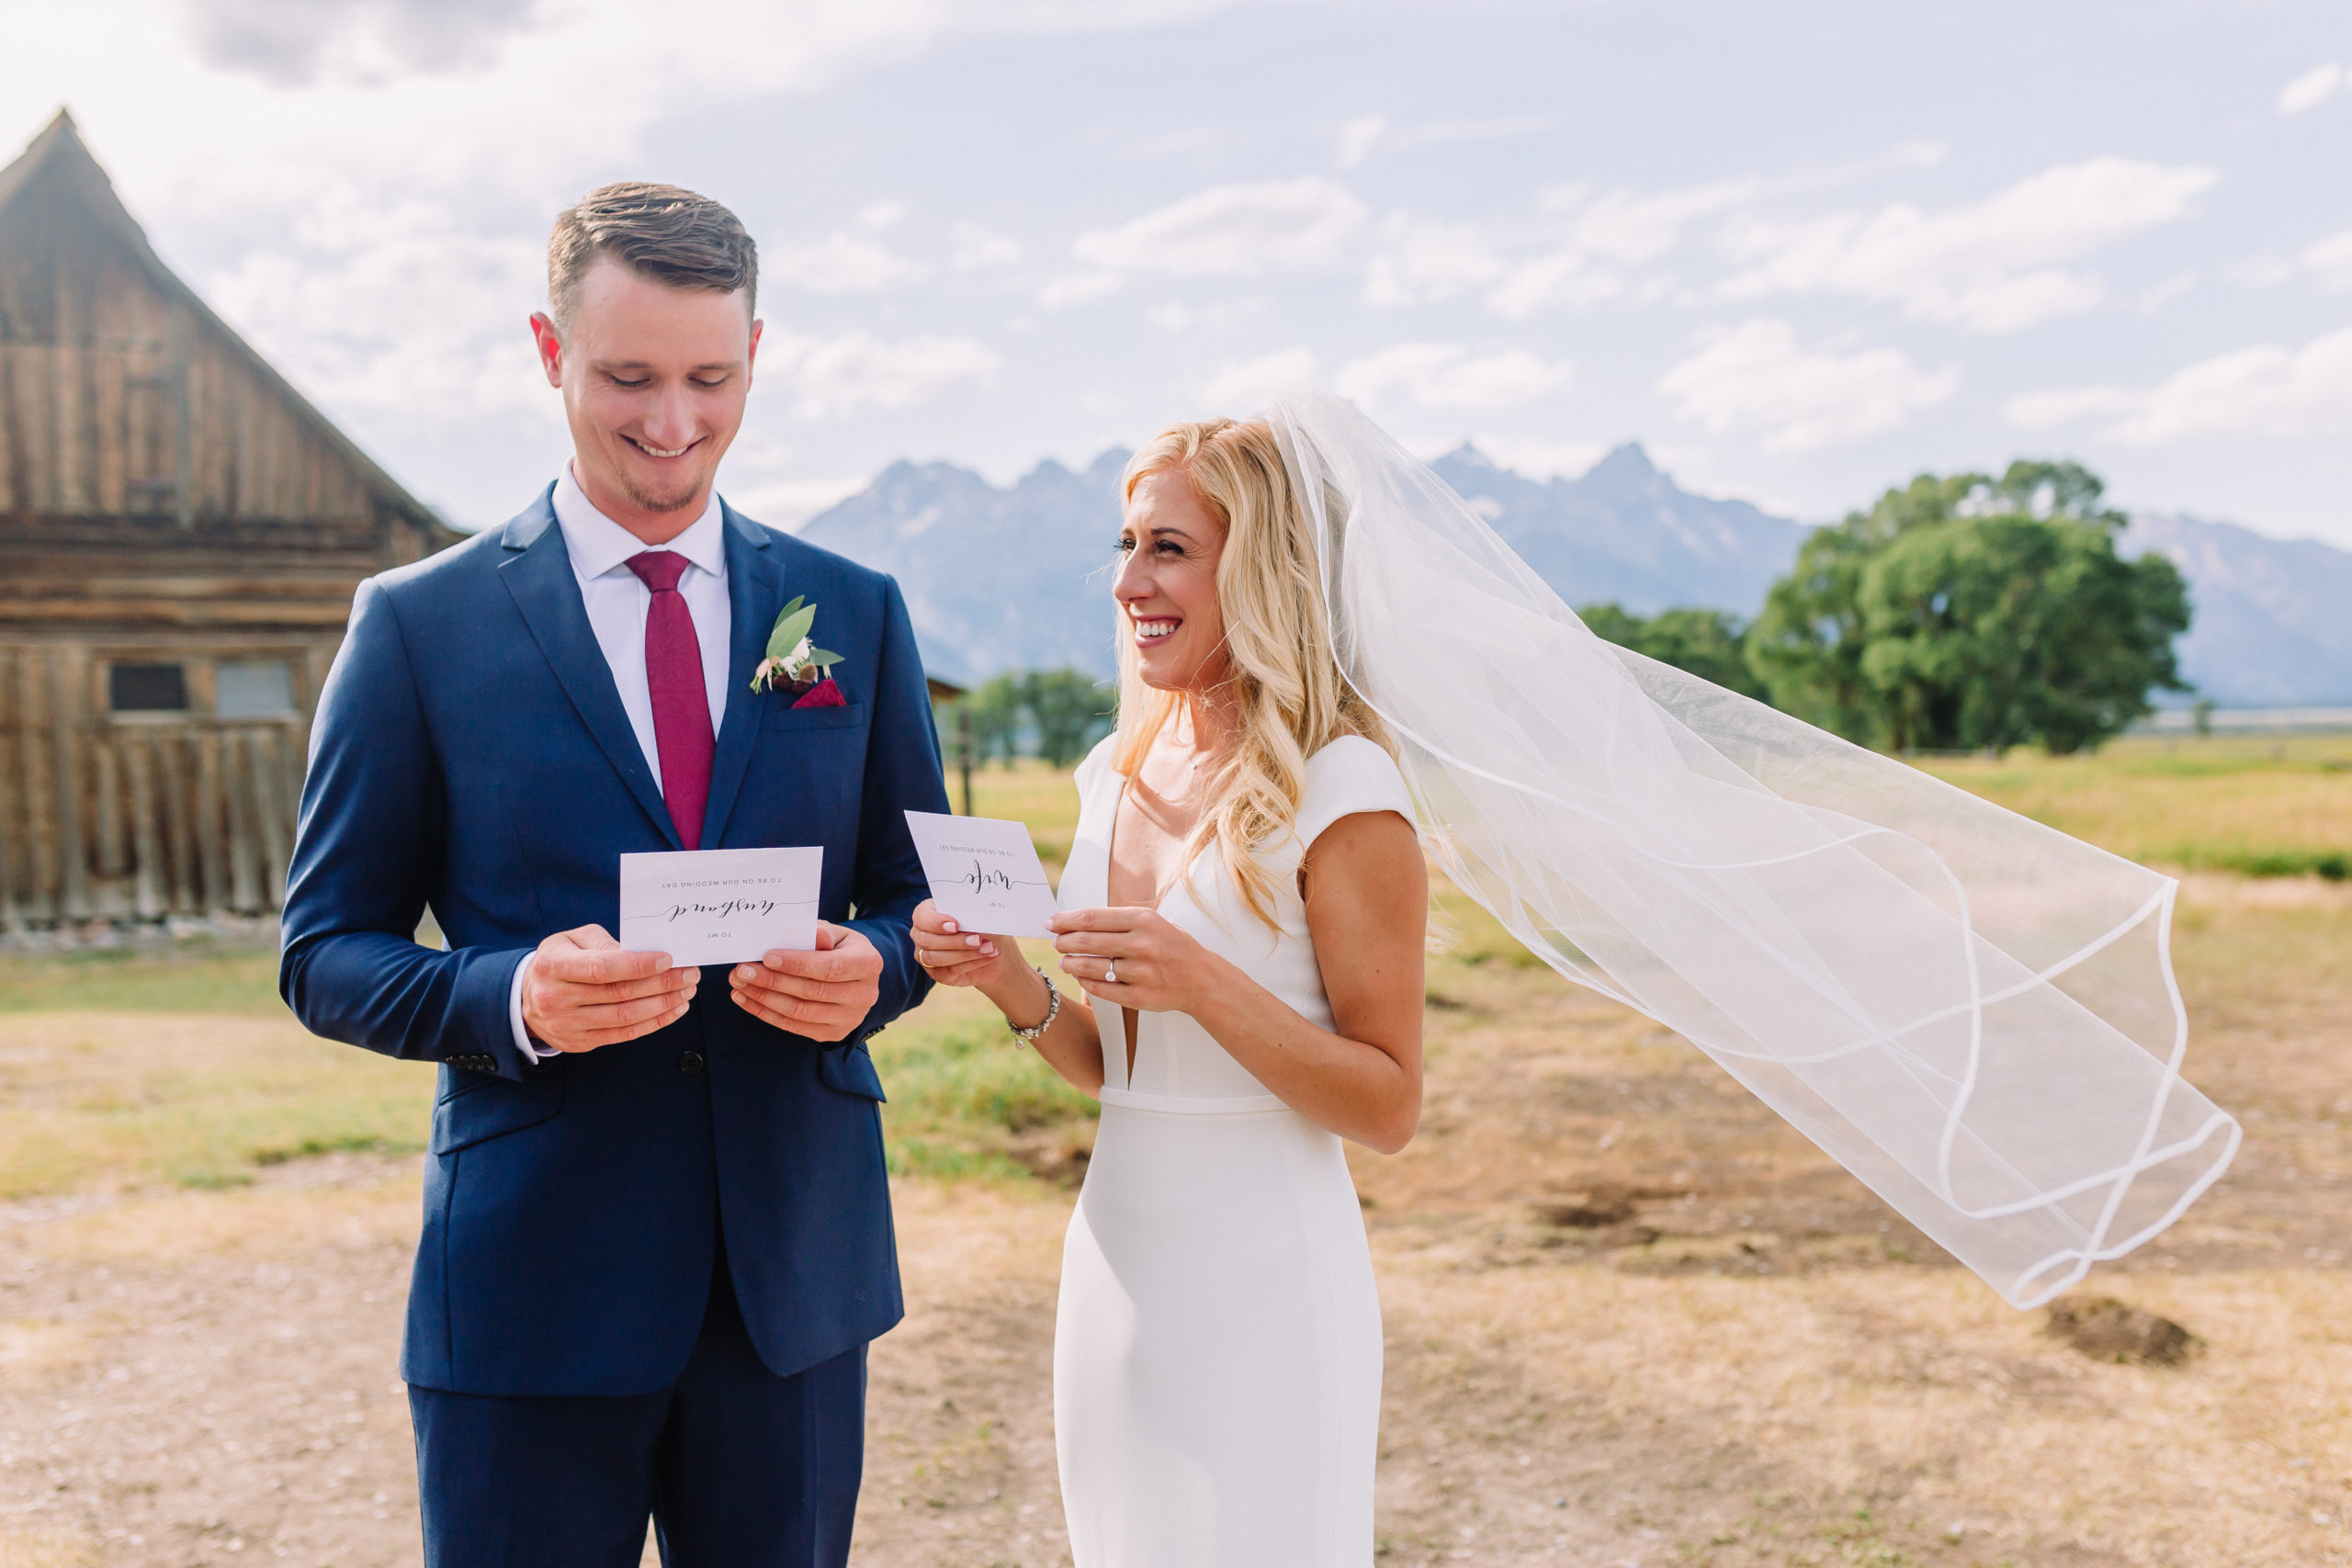 bride and groom at Mormon Row sharing their private vows to each other on their summer wedding day